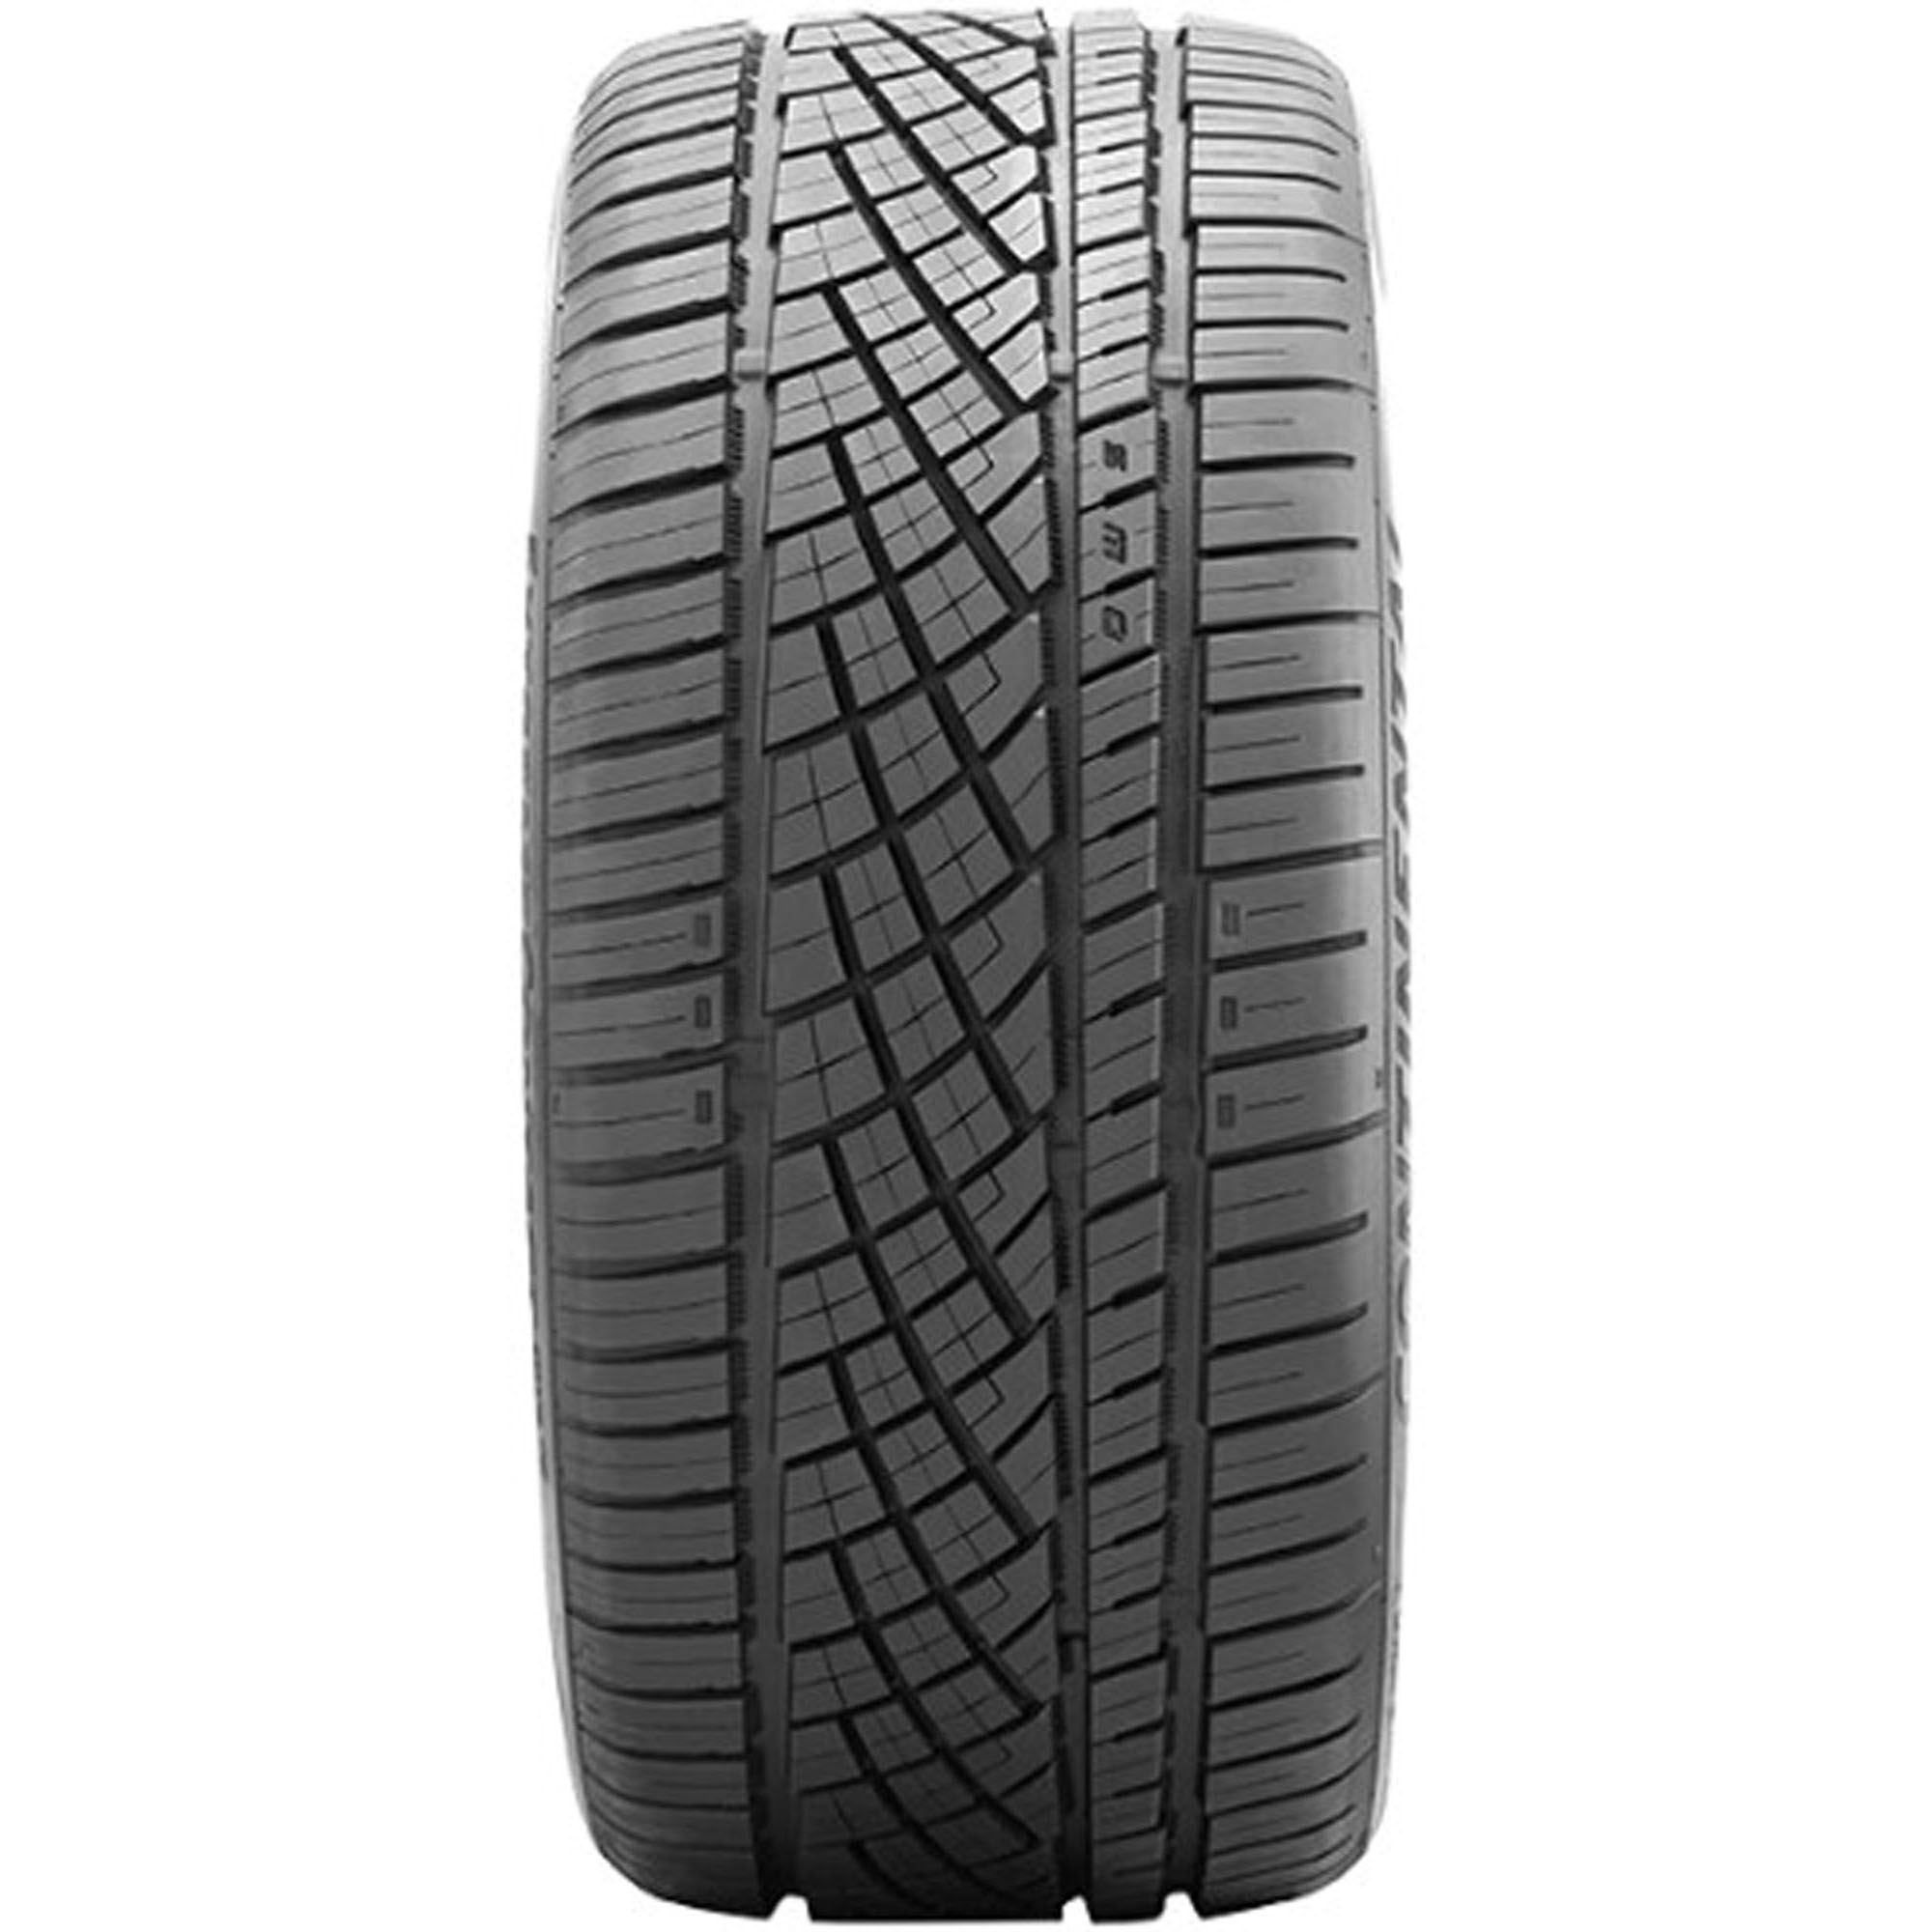 Continental ExtremeContact DWS06 All Season 315/35ZR20 110Y XL Passenger  Tire